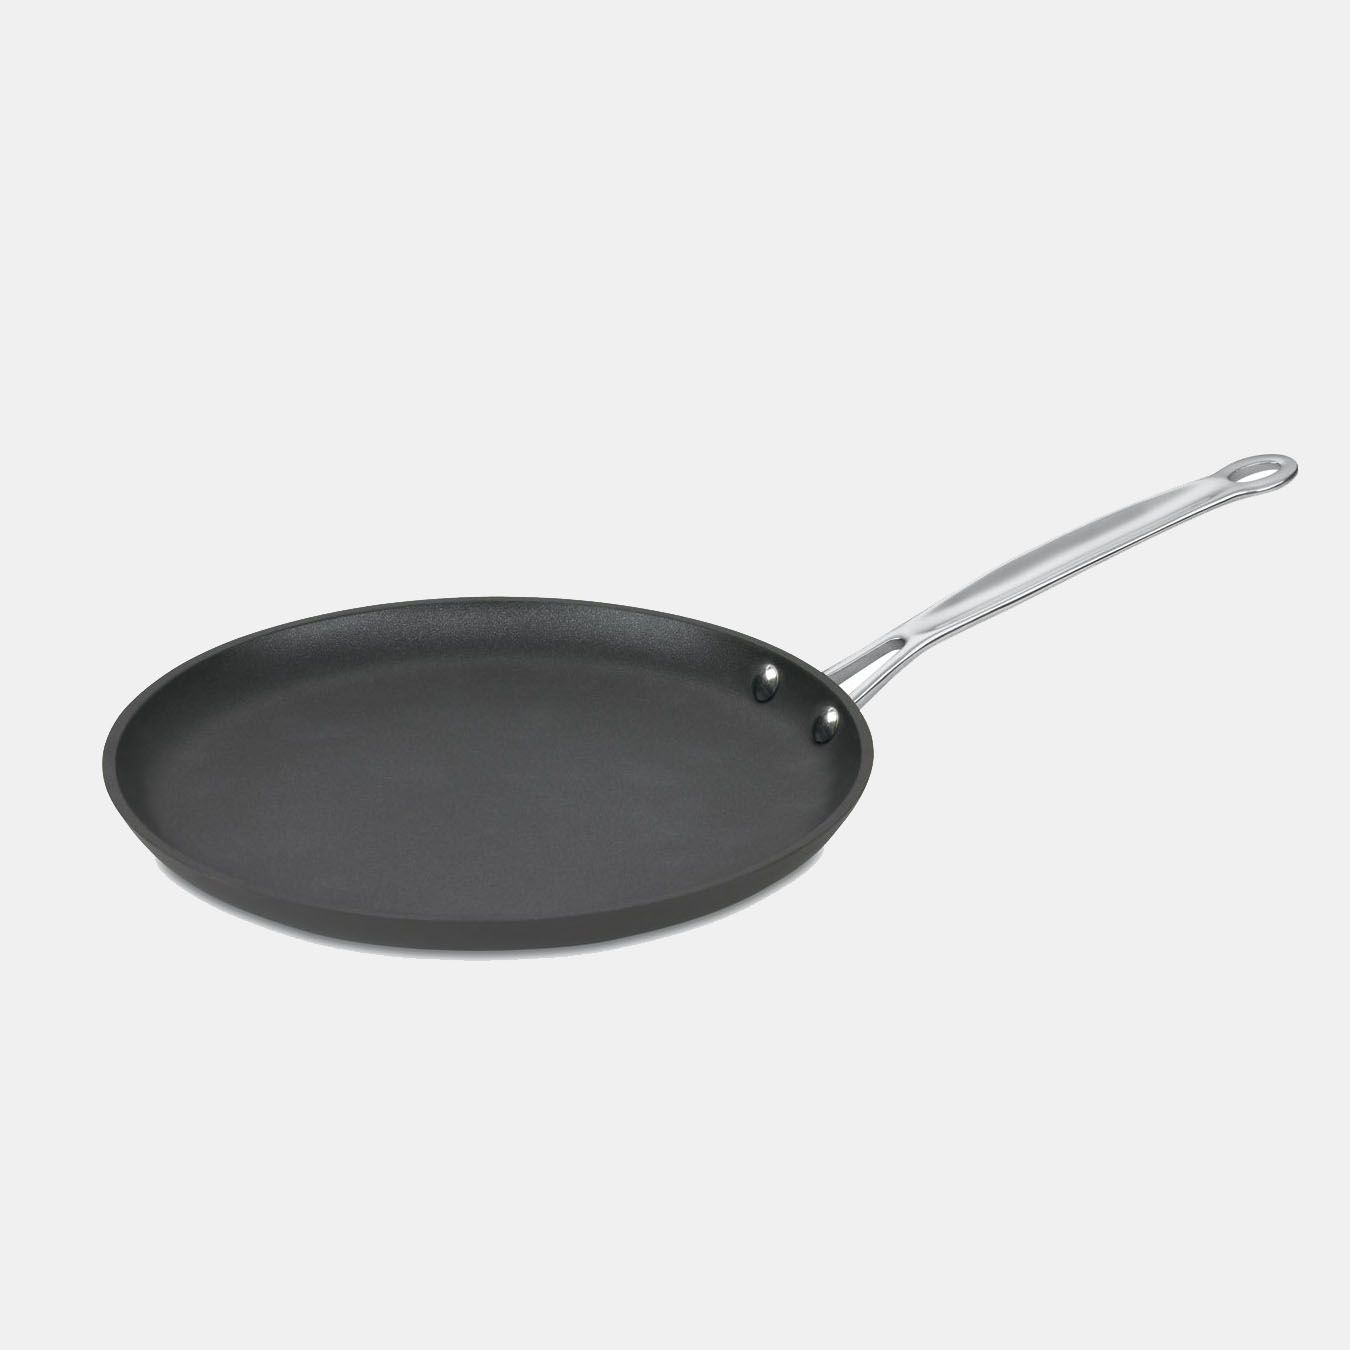 8 Best Crepe Makers Top Rated Crepe Pans For Home